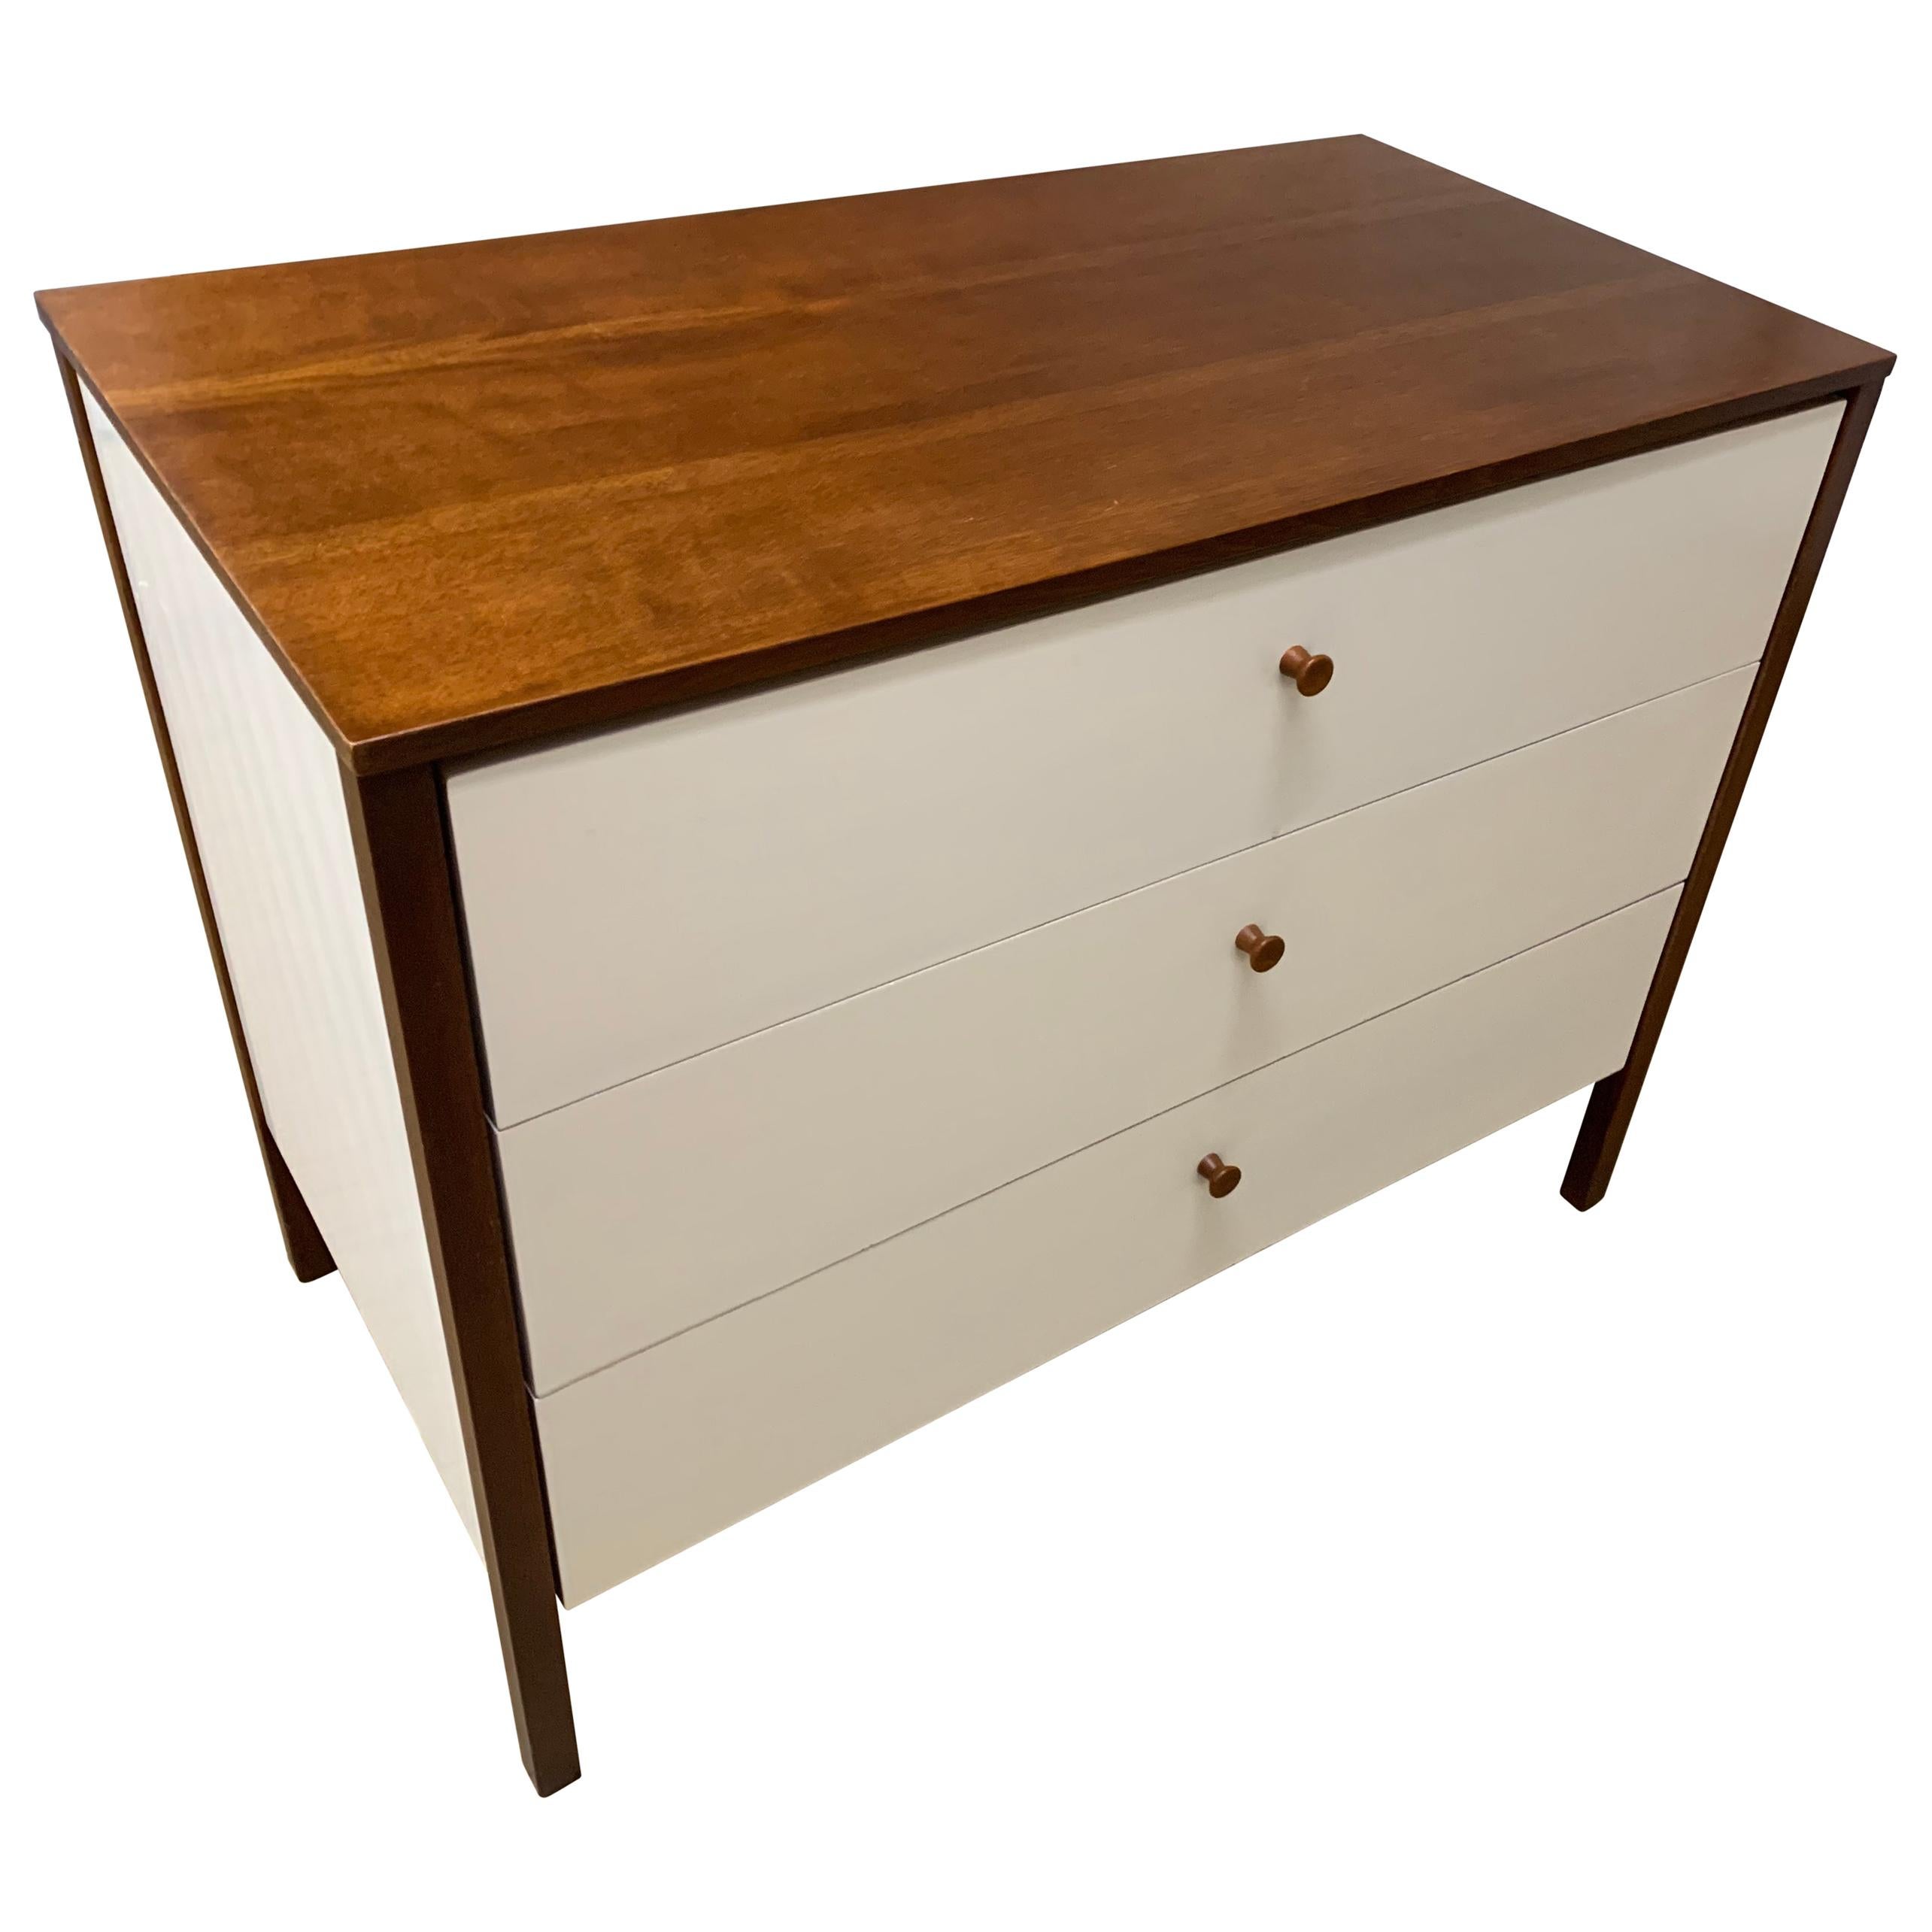 Mid-Century Modern Knoll Cream and Walnut Dresser or Nightstand For Sale